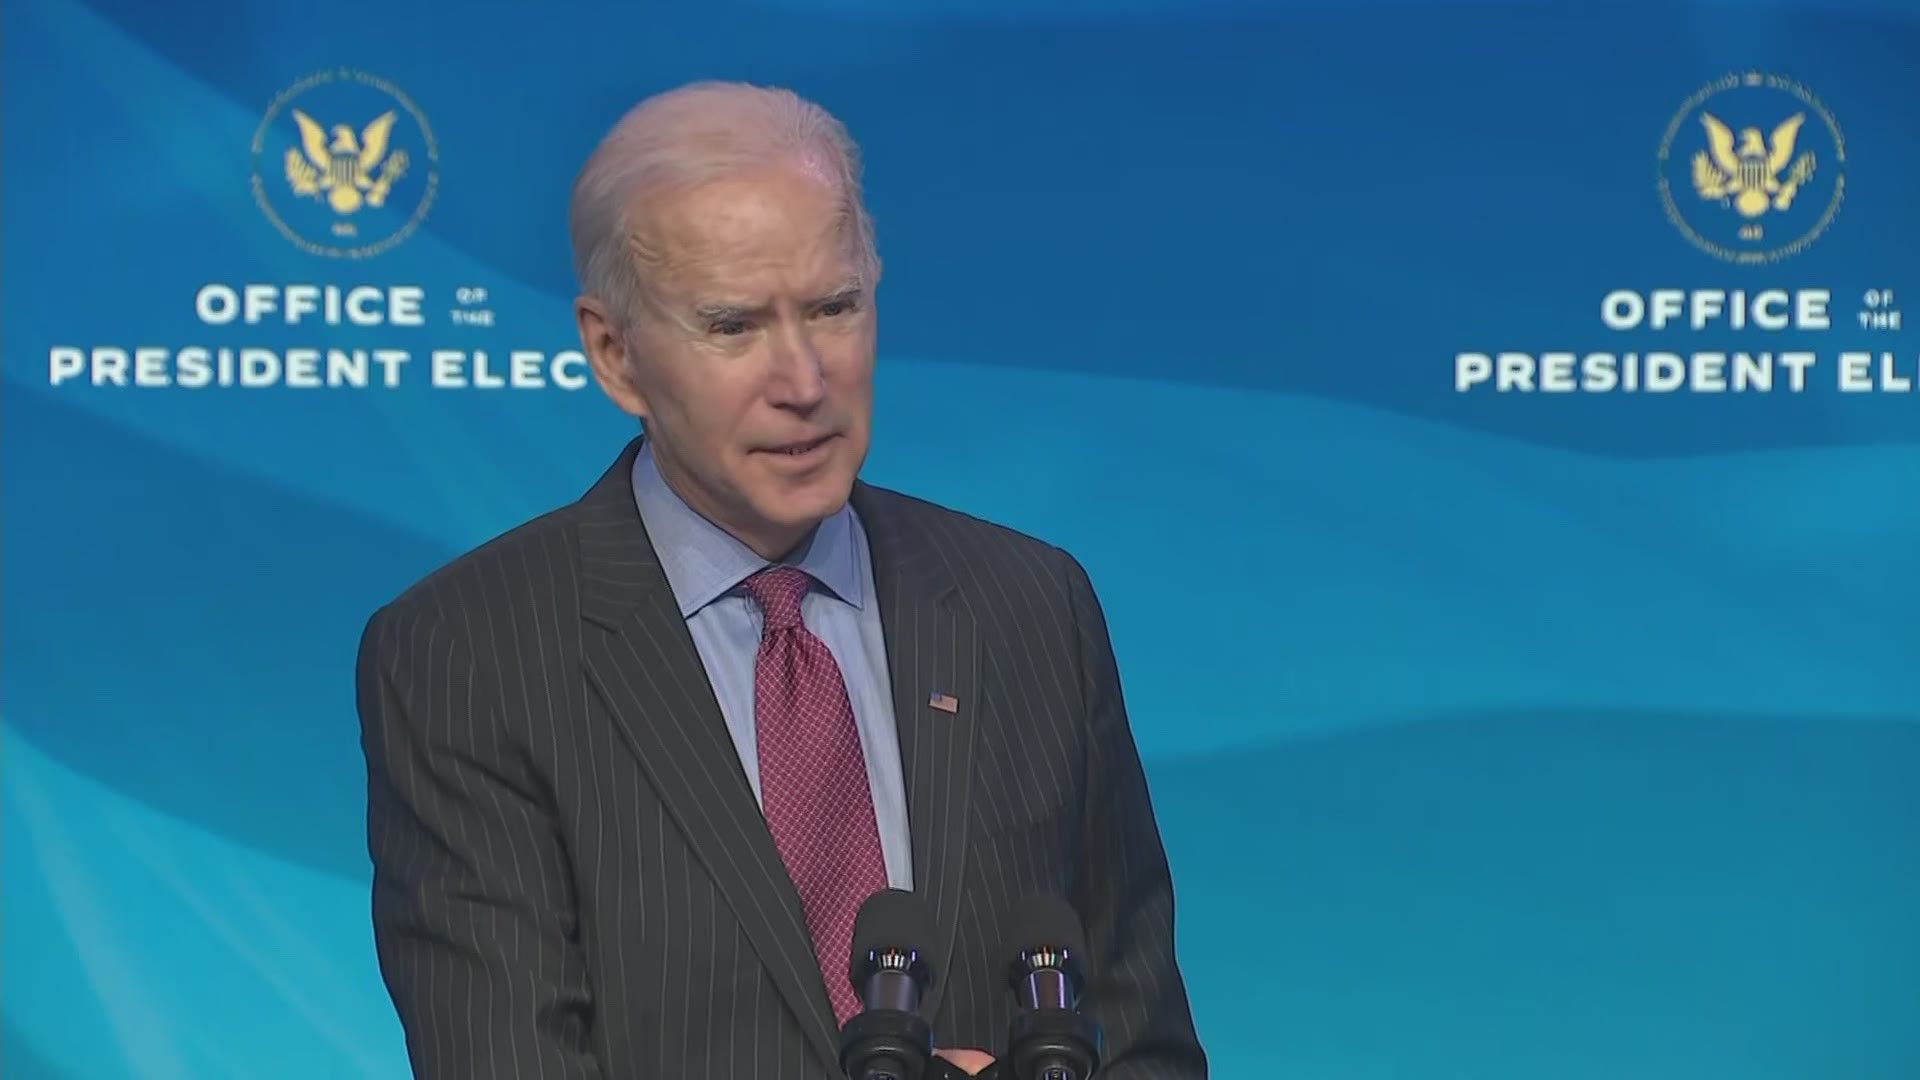 President-elect Joe Biden says he'll announce a plan for legislation to invest trillions of dollars to help the economy struggling during the coronavirus pandemic.